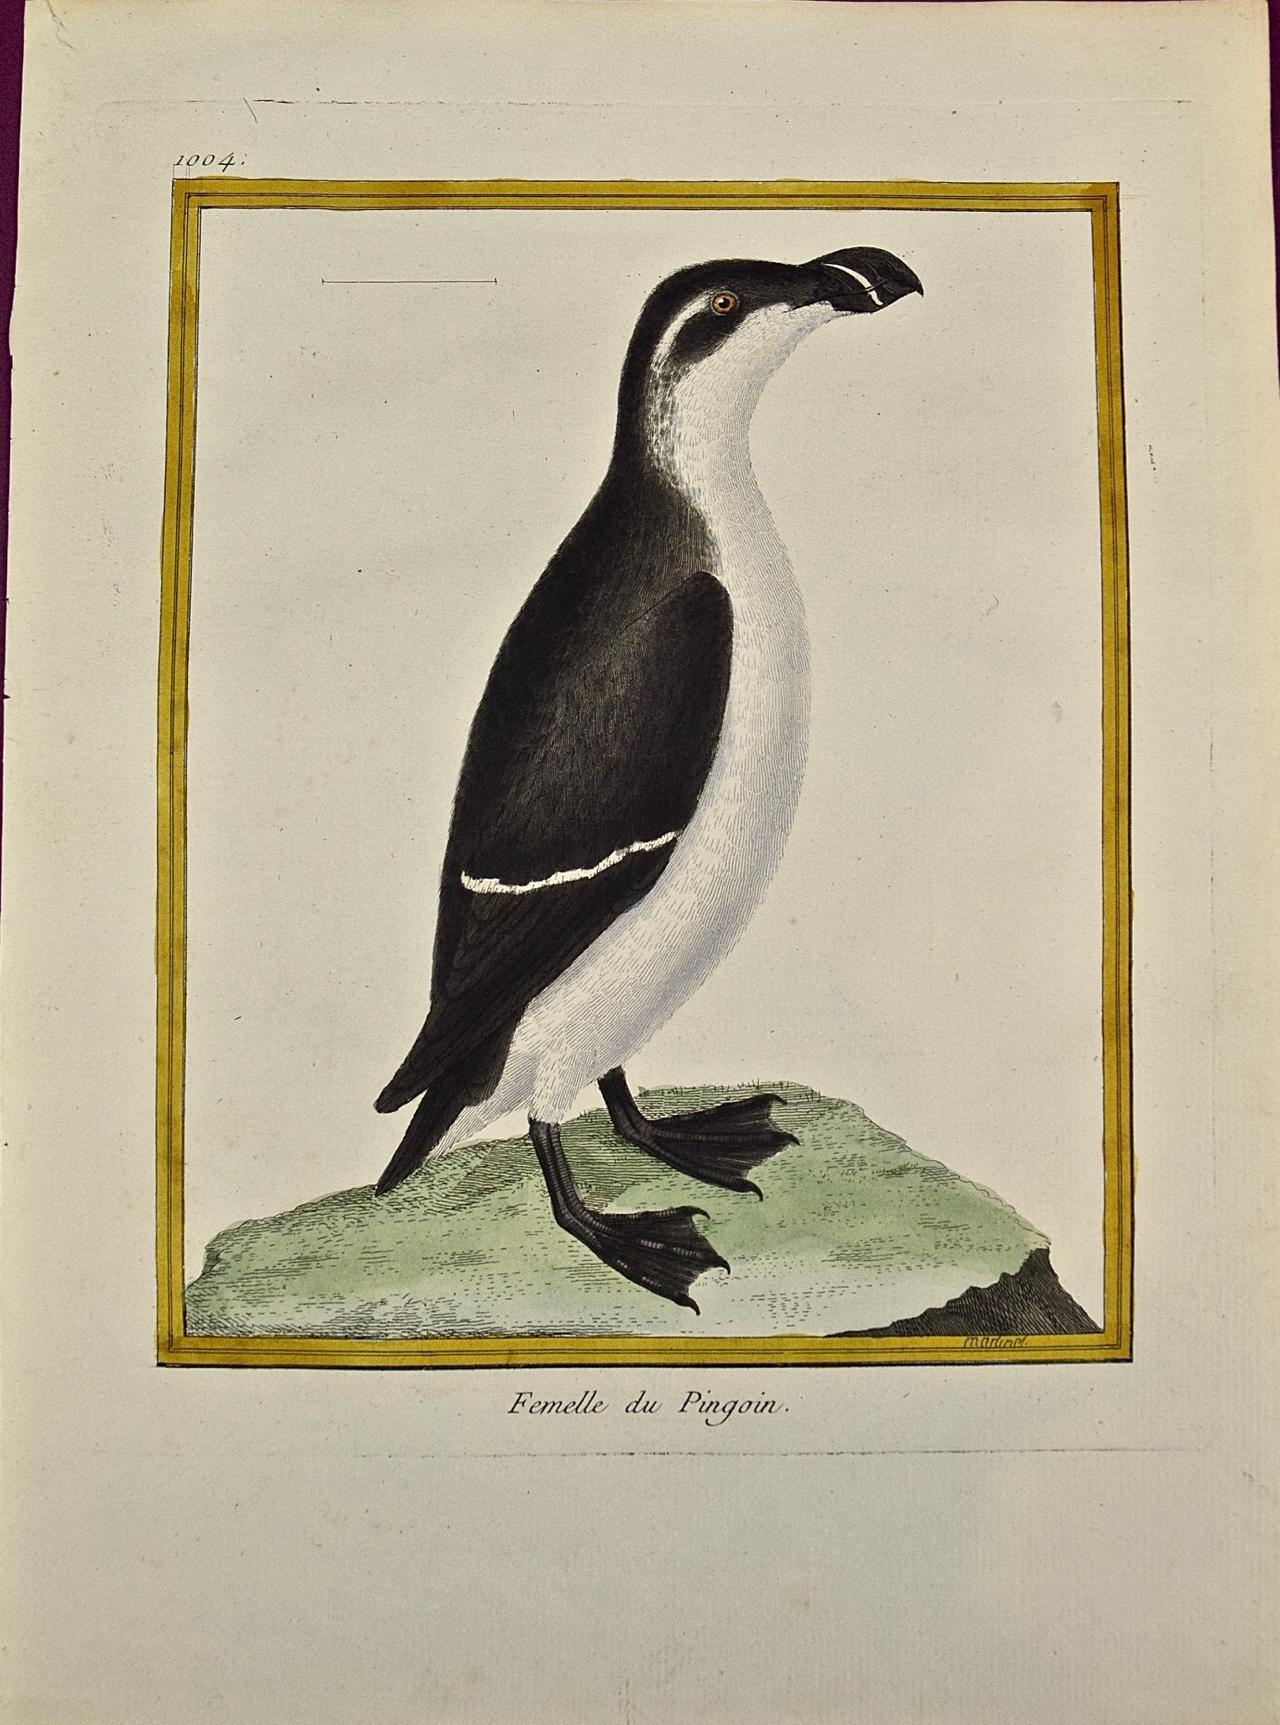 Francois Nicolas Martinet Animal Print - A Female Penguin: An 18th Century Hand-colored Engraving by Martinet